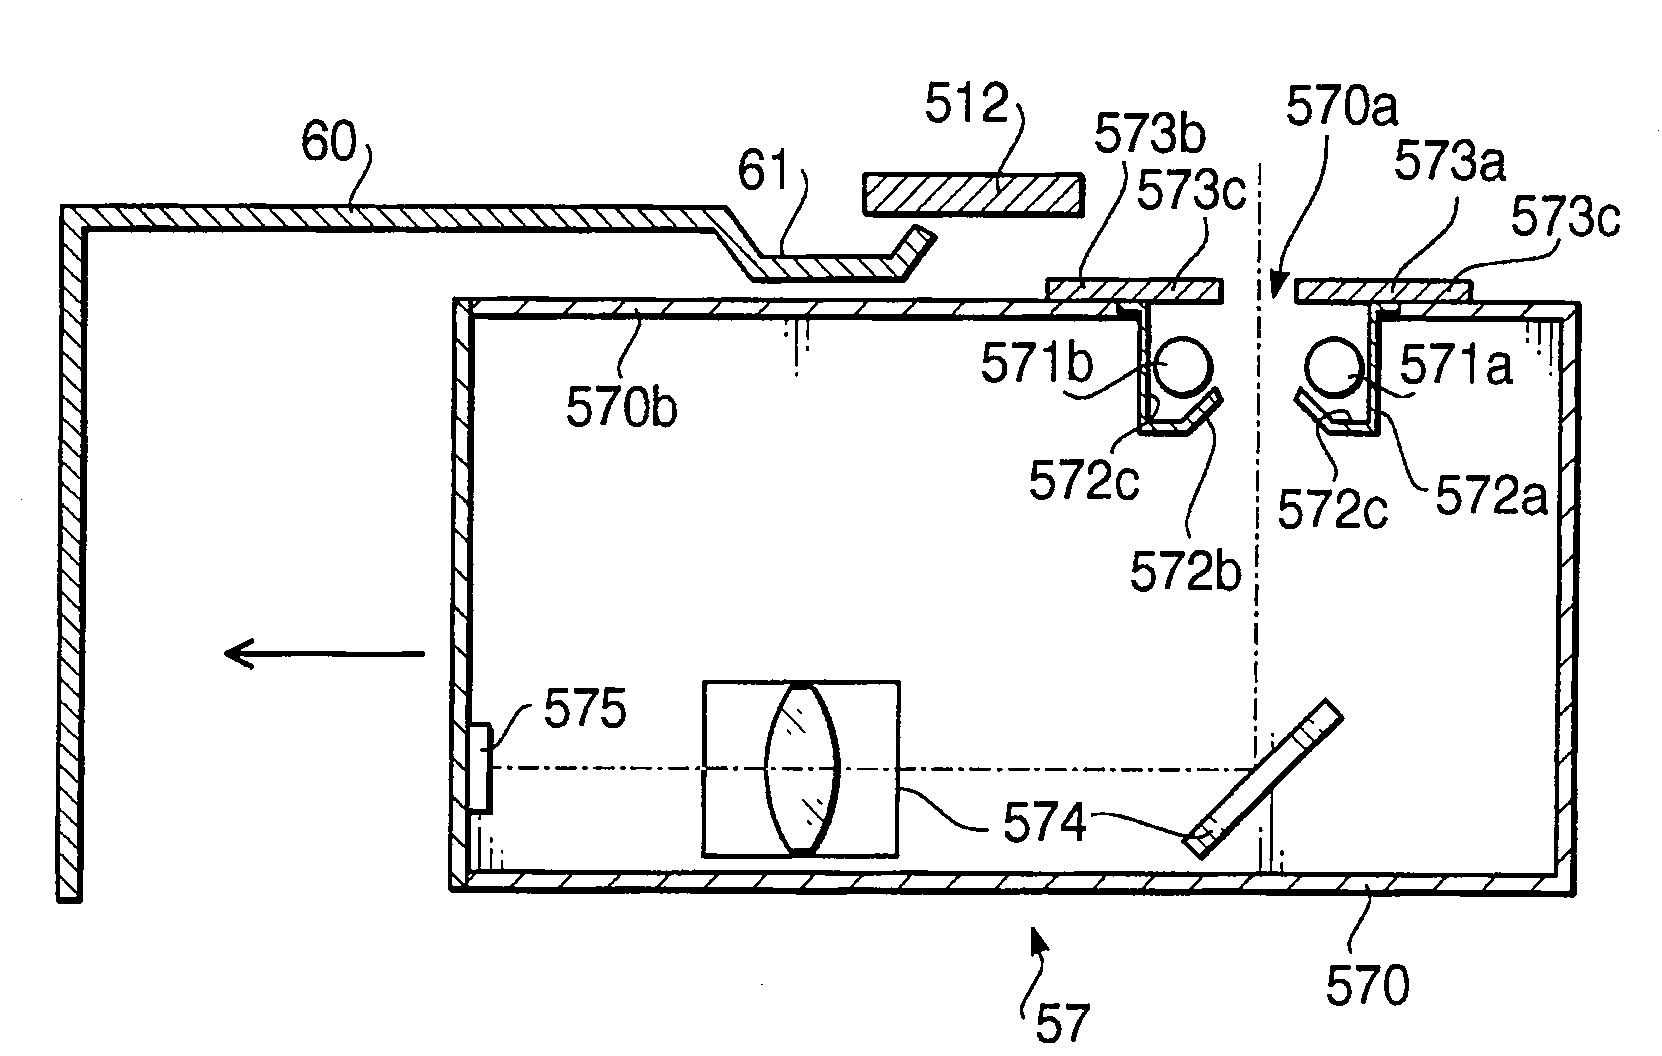 Carriage for image scanning unit including radiation plate for conducting heat